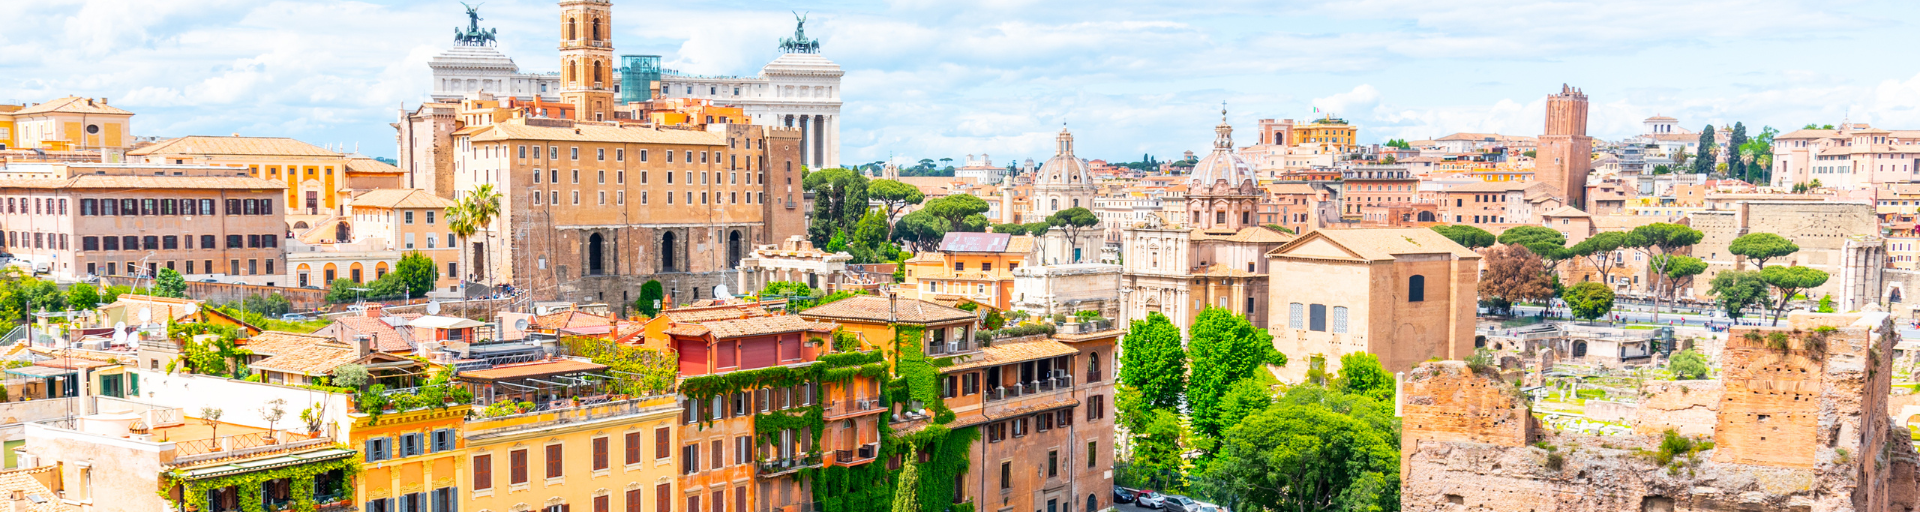 View of Rome on the Global Network Program